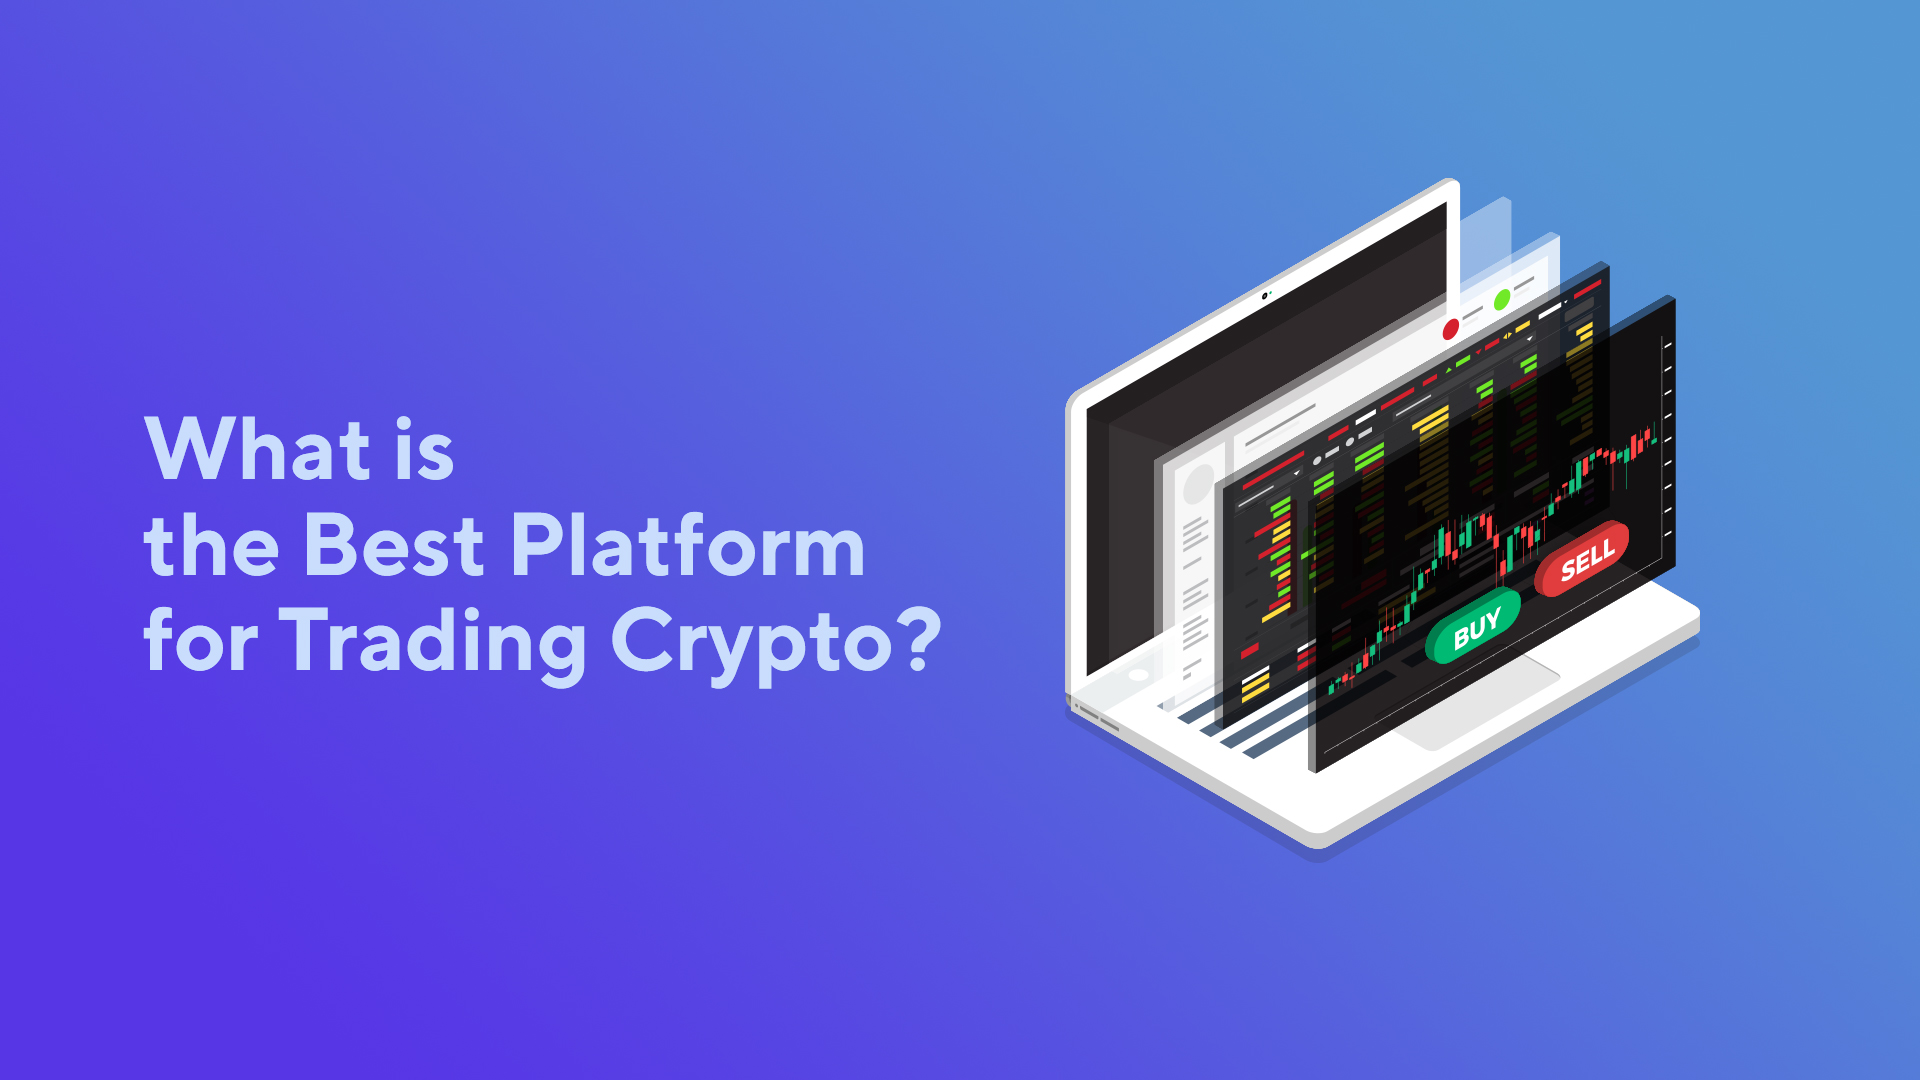 What is the Best Platform for Trading Crypto?